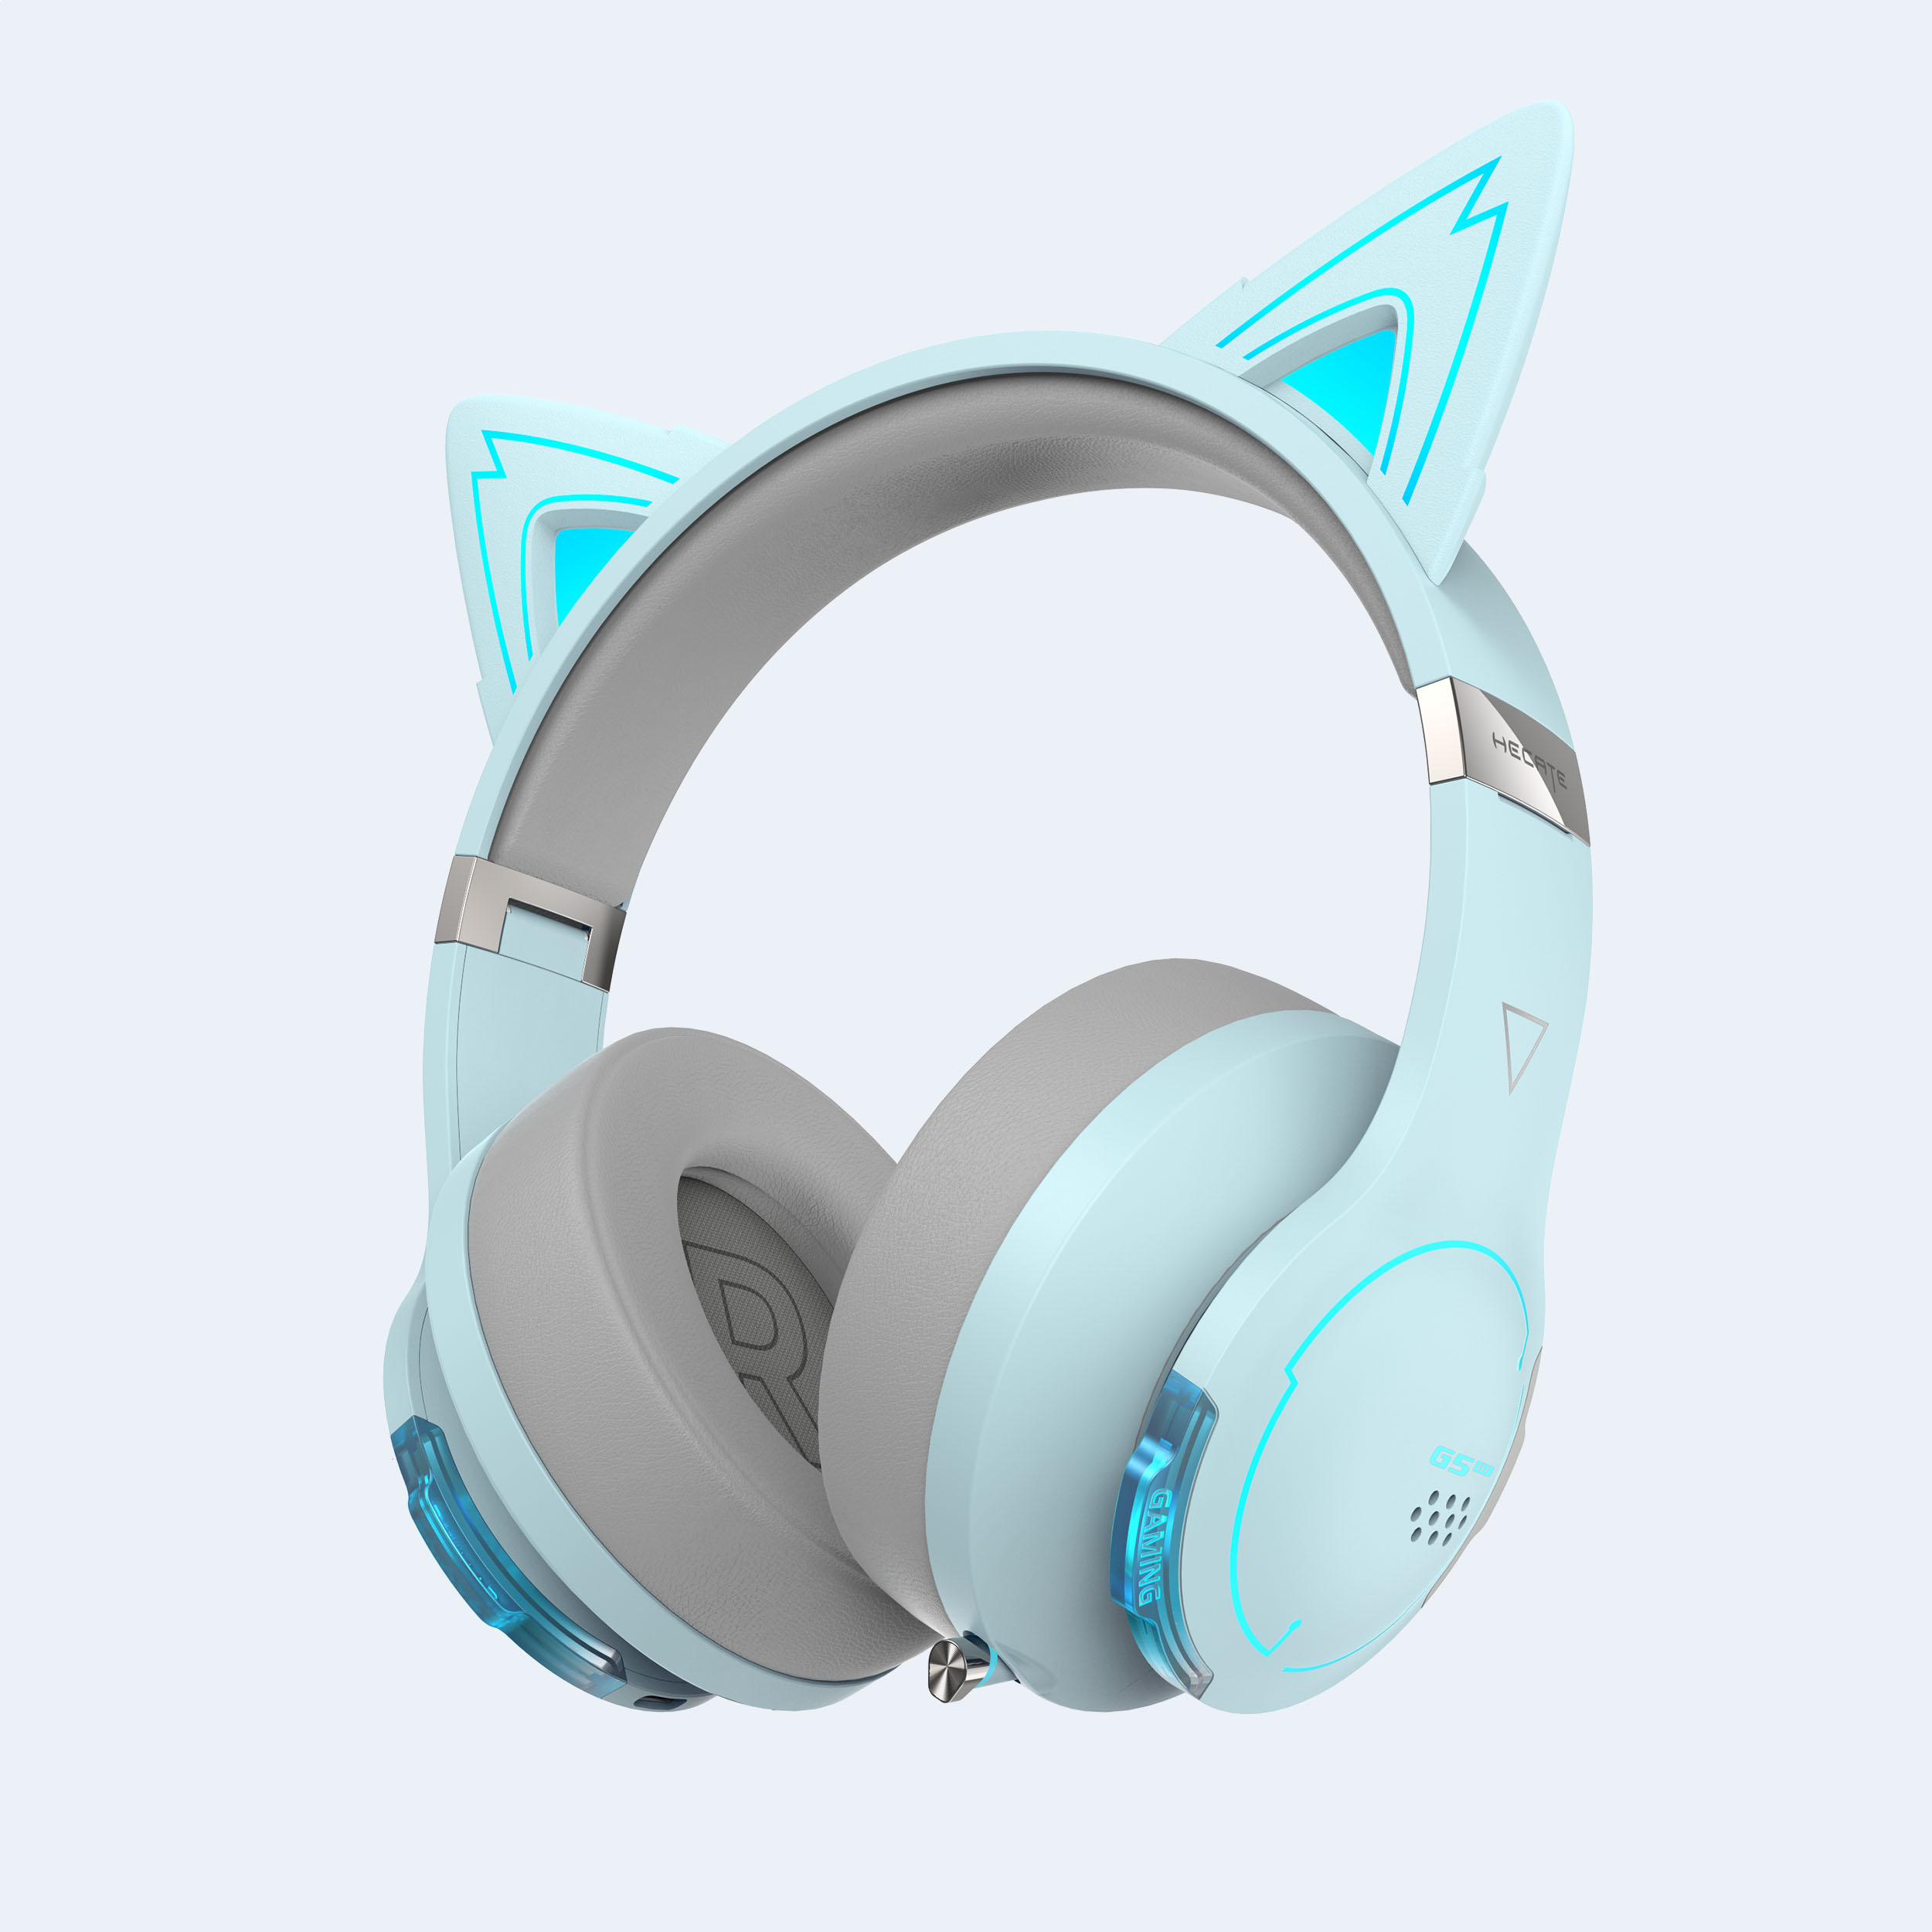 Edifier G5BT CAT Wireless Bluetooth Gaming Headset with Mic, Over Ear Headphones with Detachable Cat Ear, RGB Light - Sky Blue